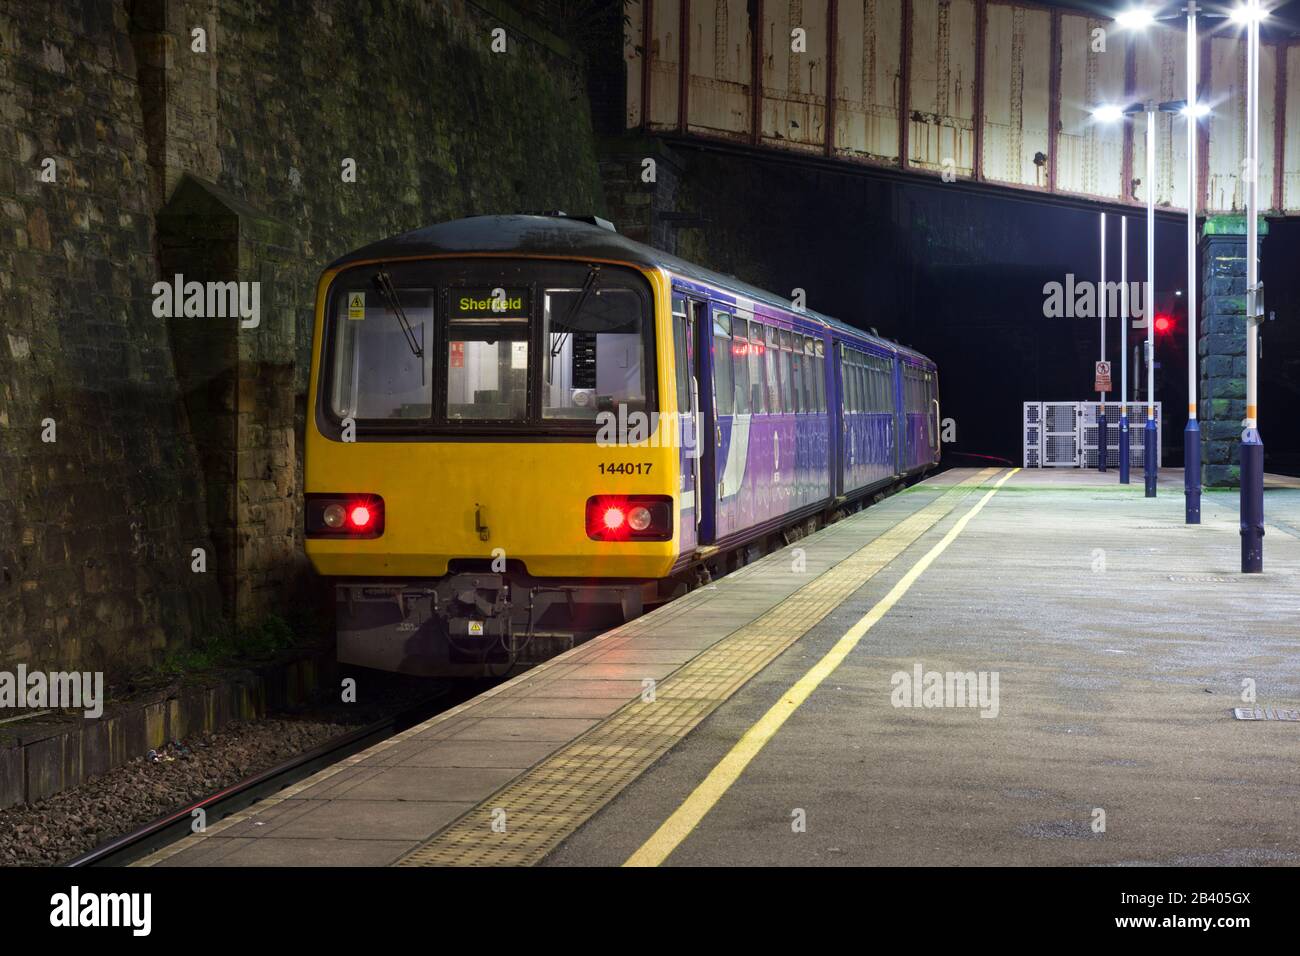 Arriva Northern rail class 144 pacer train 144017 at Sheffield railway station Stock Photo